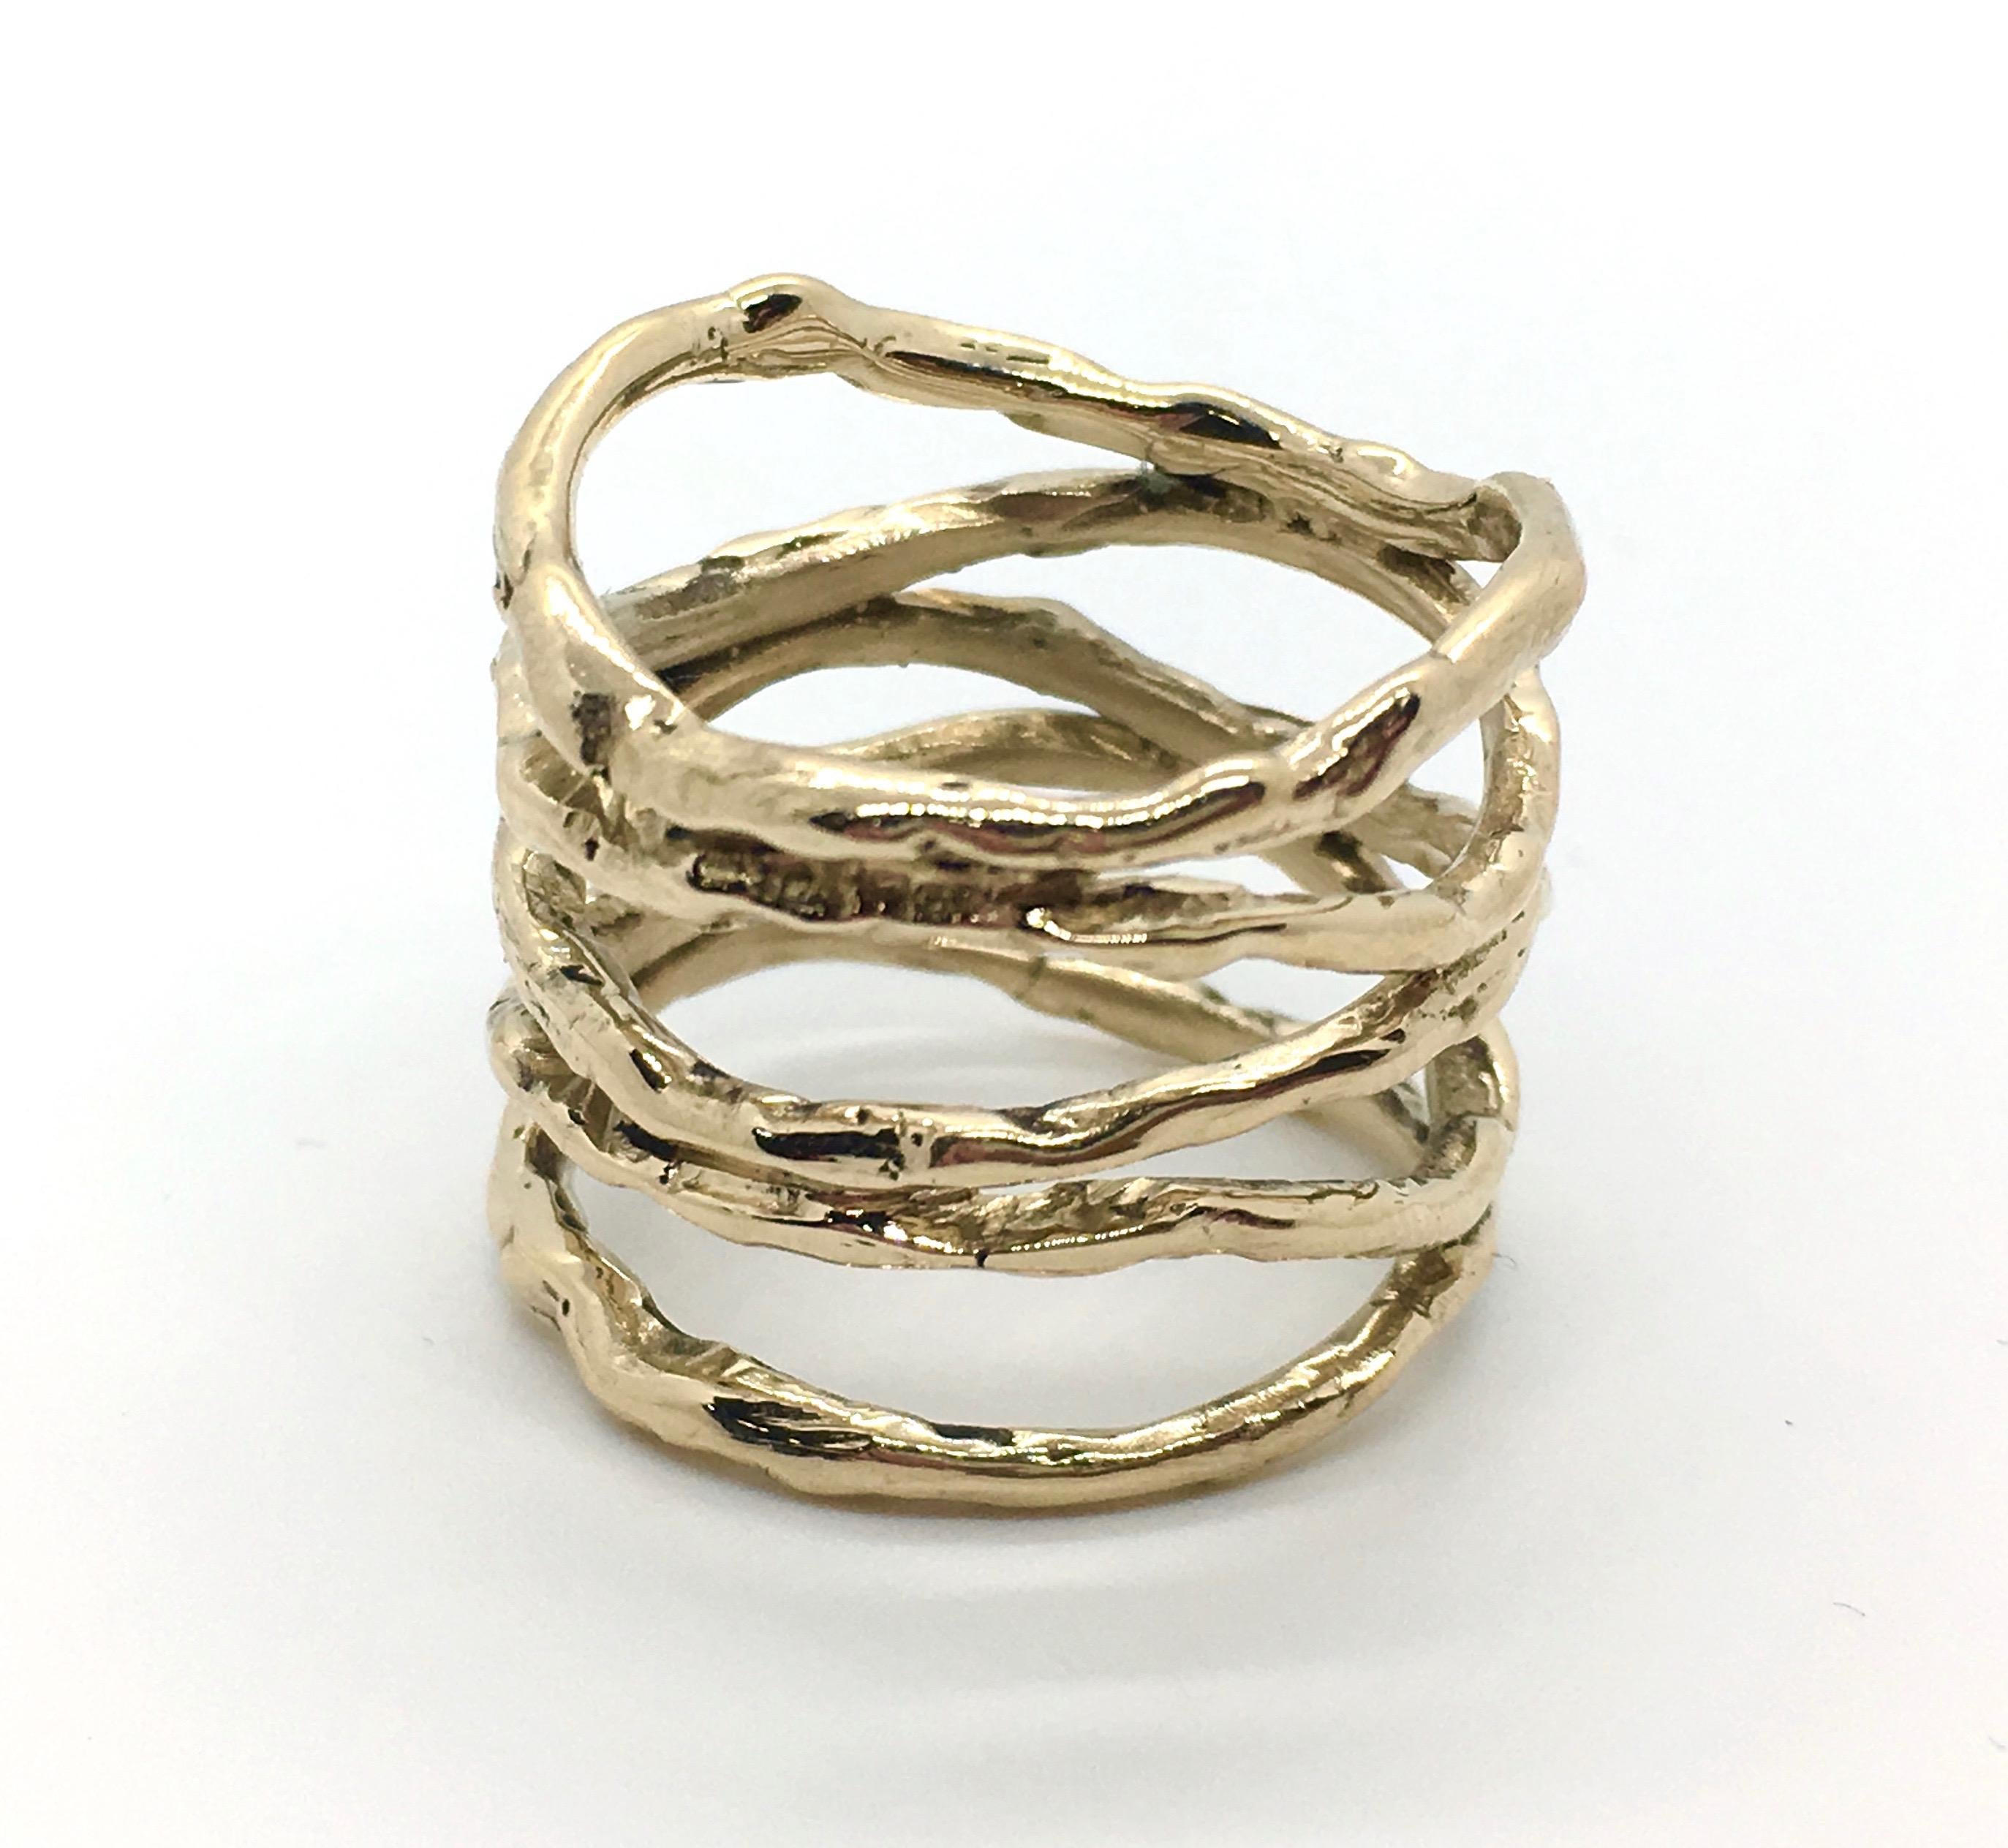 Eytan Brandes has sculpted many variations on his naturalistic branch ring.  These rings have been very popular at our store because they're not only beautiful and eye-catching, but they're also incredibly comfortable to wear.  Despite covering a